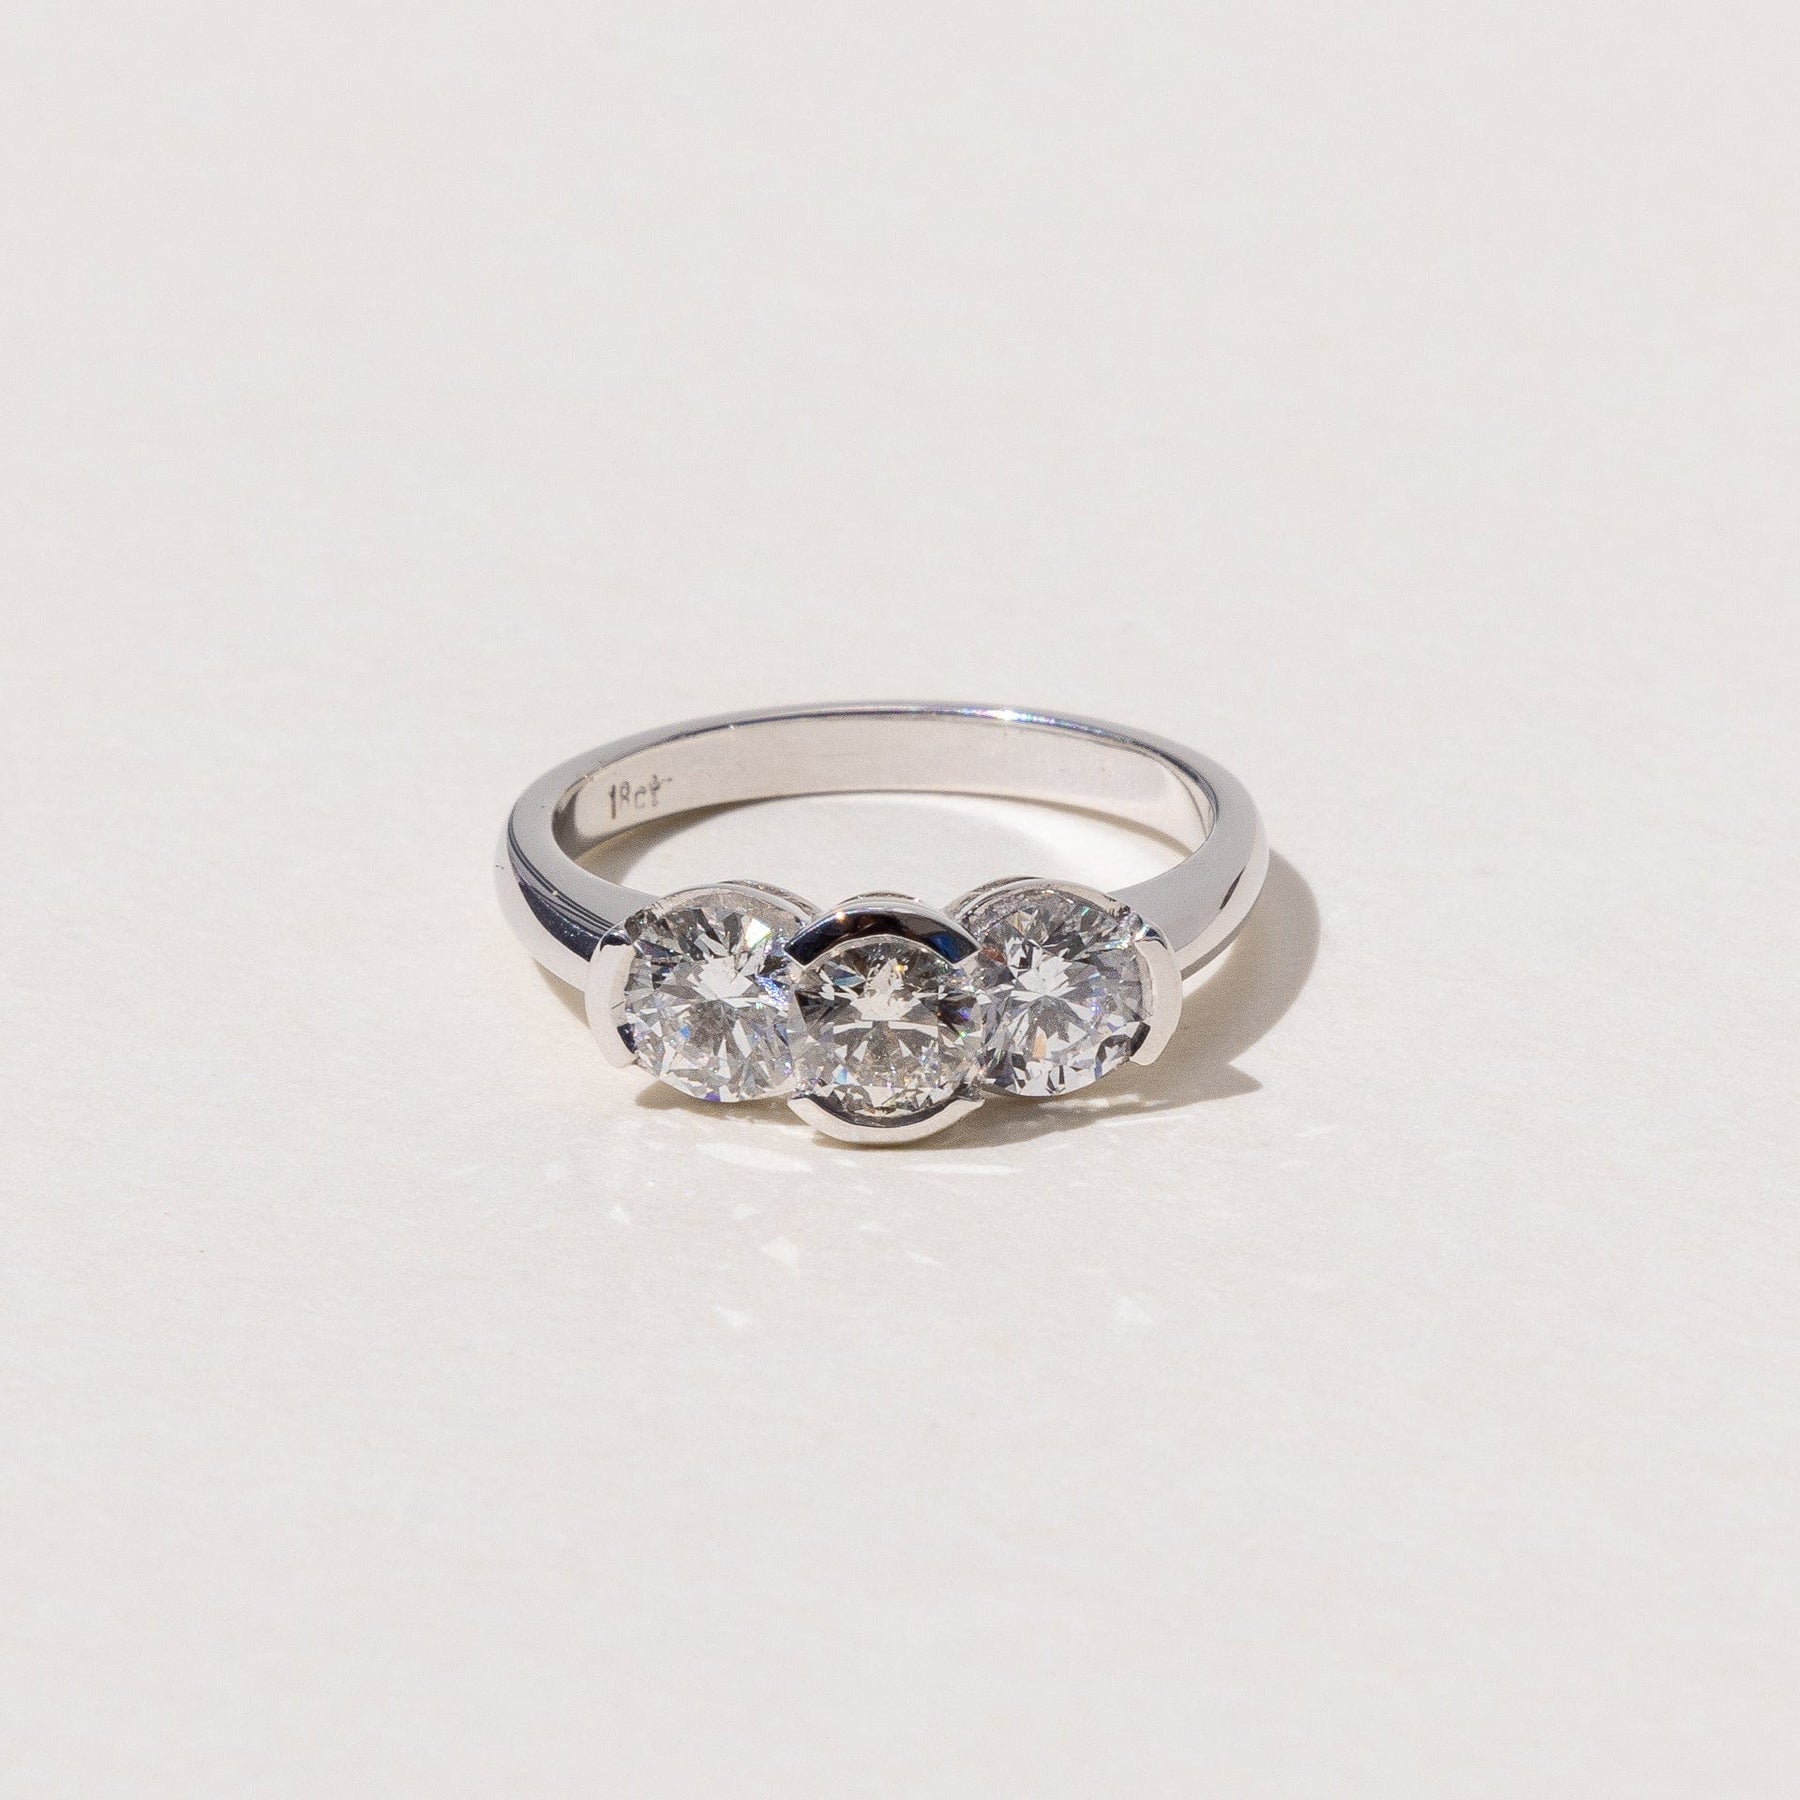 Handmade Lab Grown Diamond Engagement Ring in White Gold at Meaden Master Jewellers